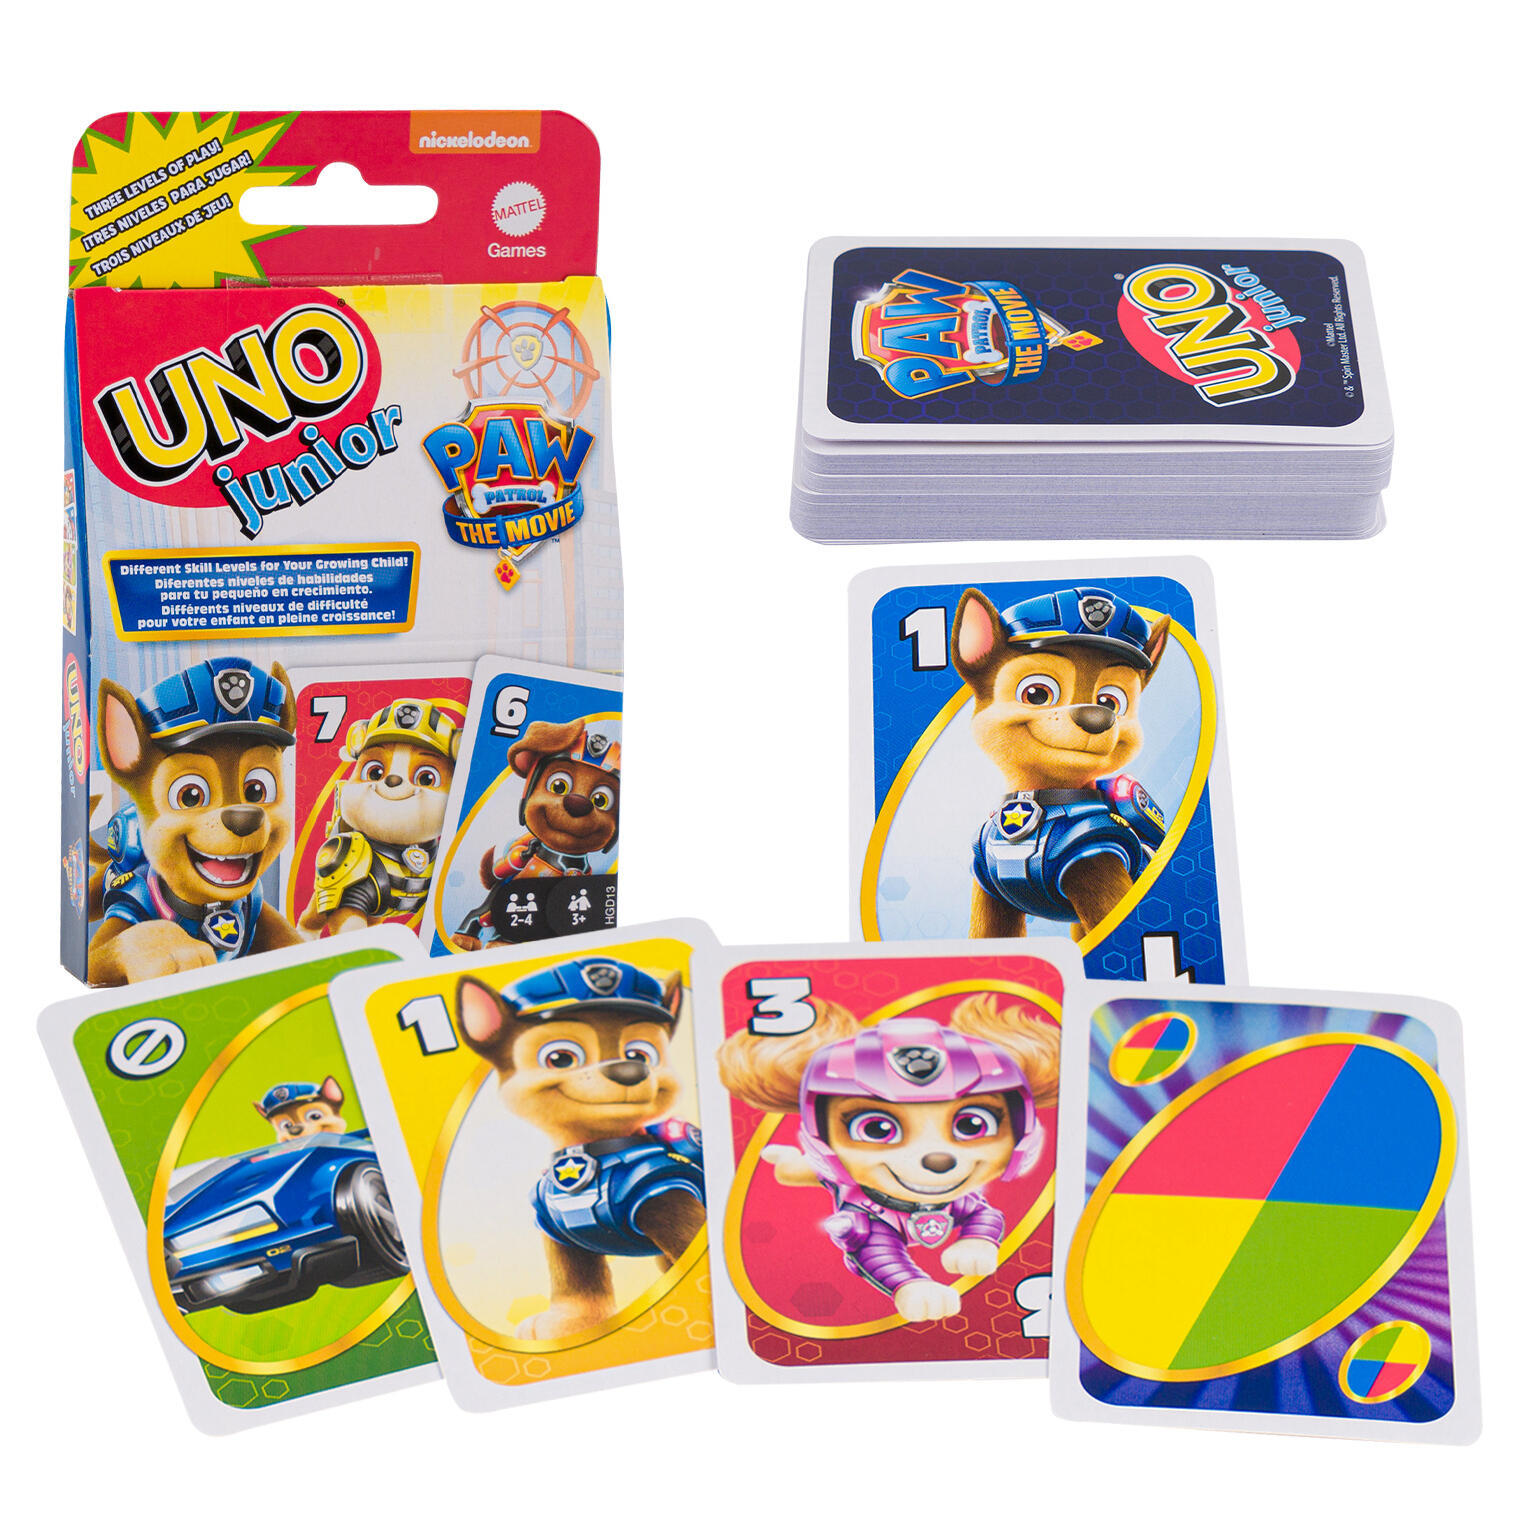 Mattel Games UNO Play with Pride Card Game with 112 Cards and Instructions,  Great Gift for Ages 7 Years Old & Up